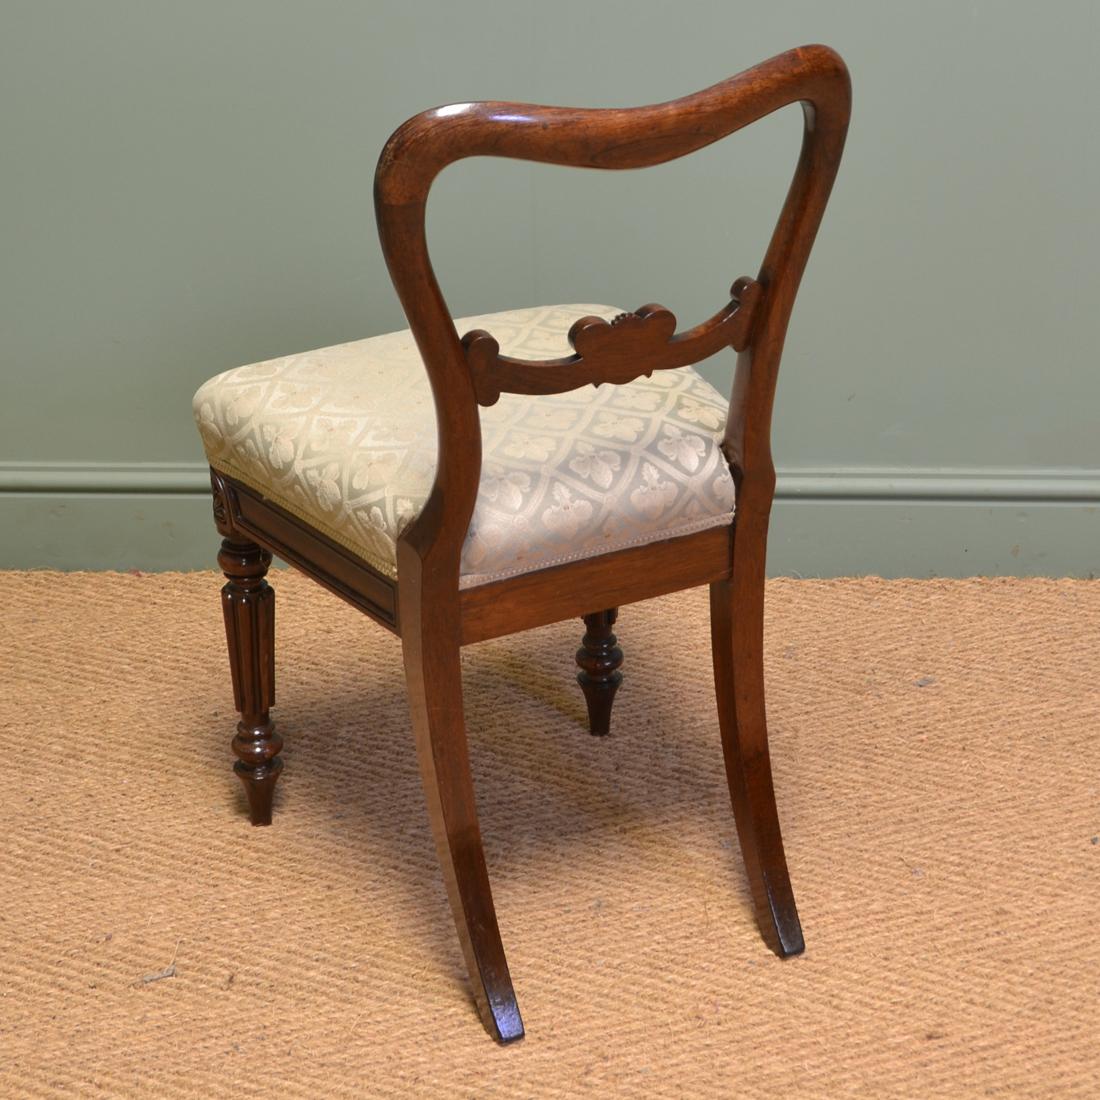 Spectacular set of six Gillows rosewood antique William IV dining chairs

Almost certainly constructed by the renowned cabinet makers Gillows due to the sheer quality and design and date from circa 1835. Each chair has a shaped back, elegantly